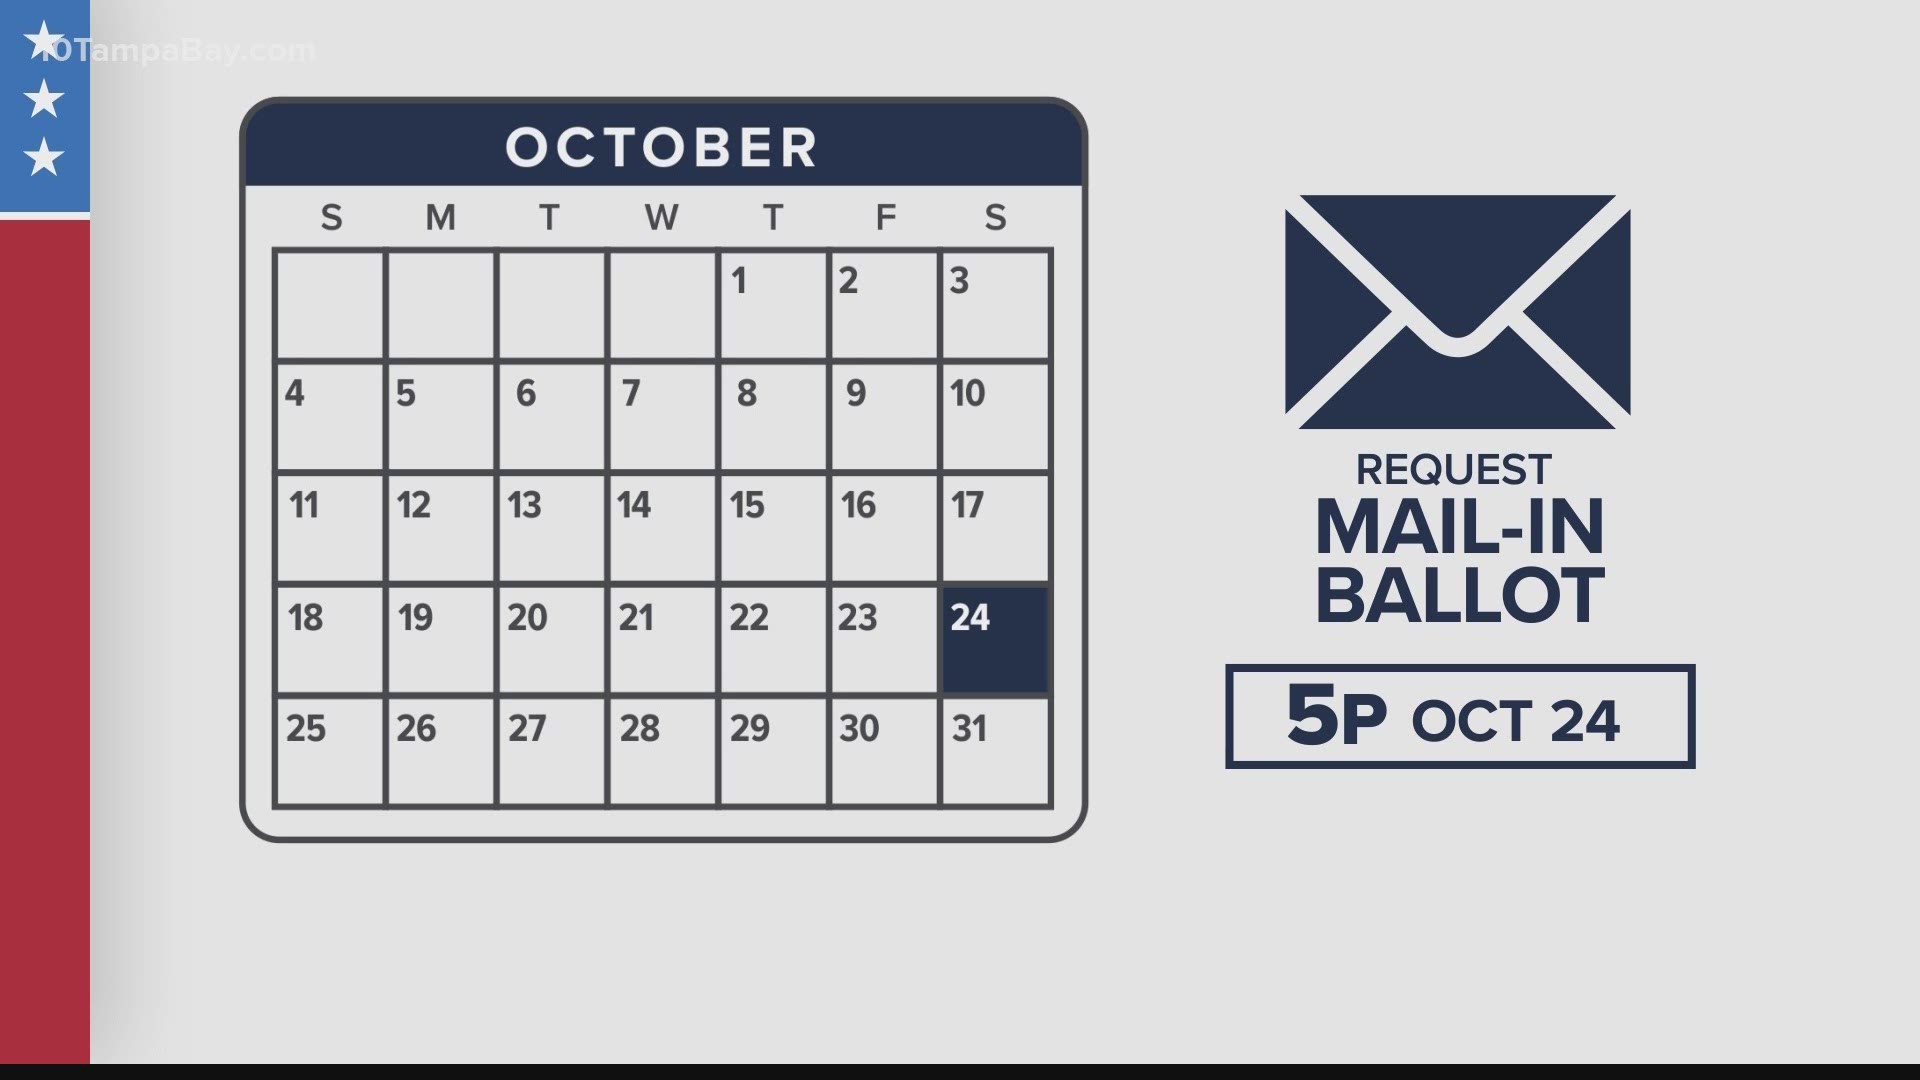 Counties can begin the domestic vote-by-mail process on September 24.